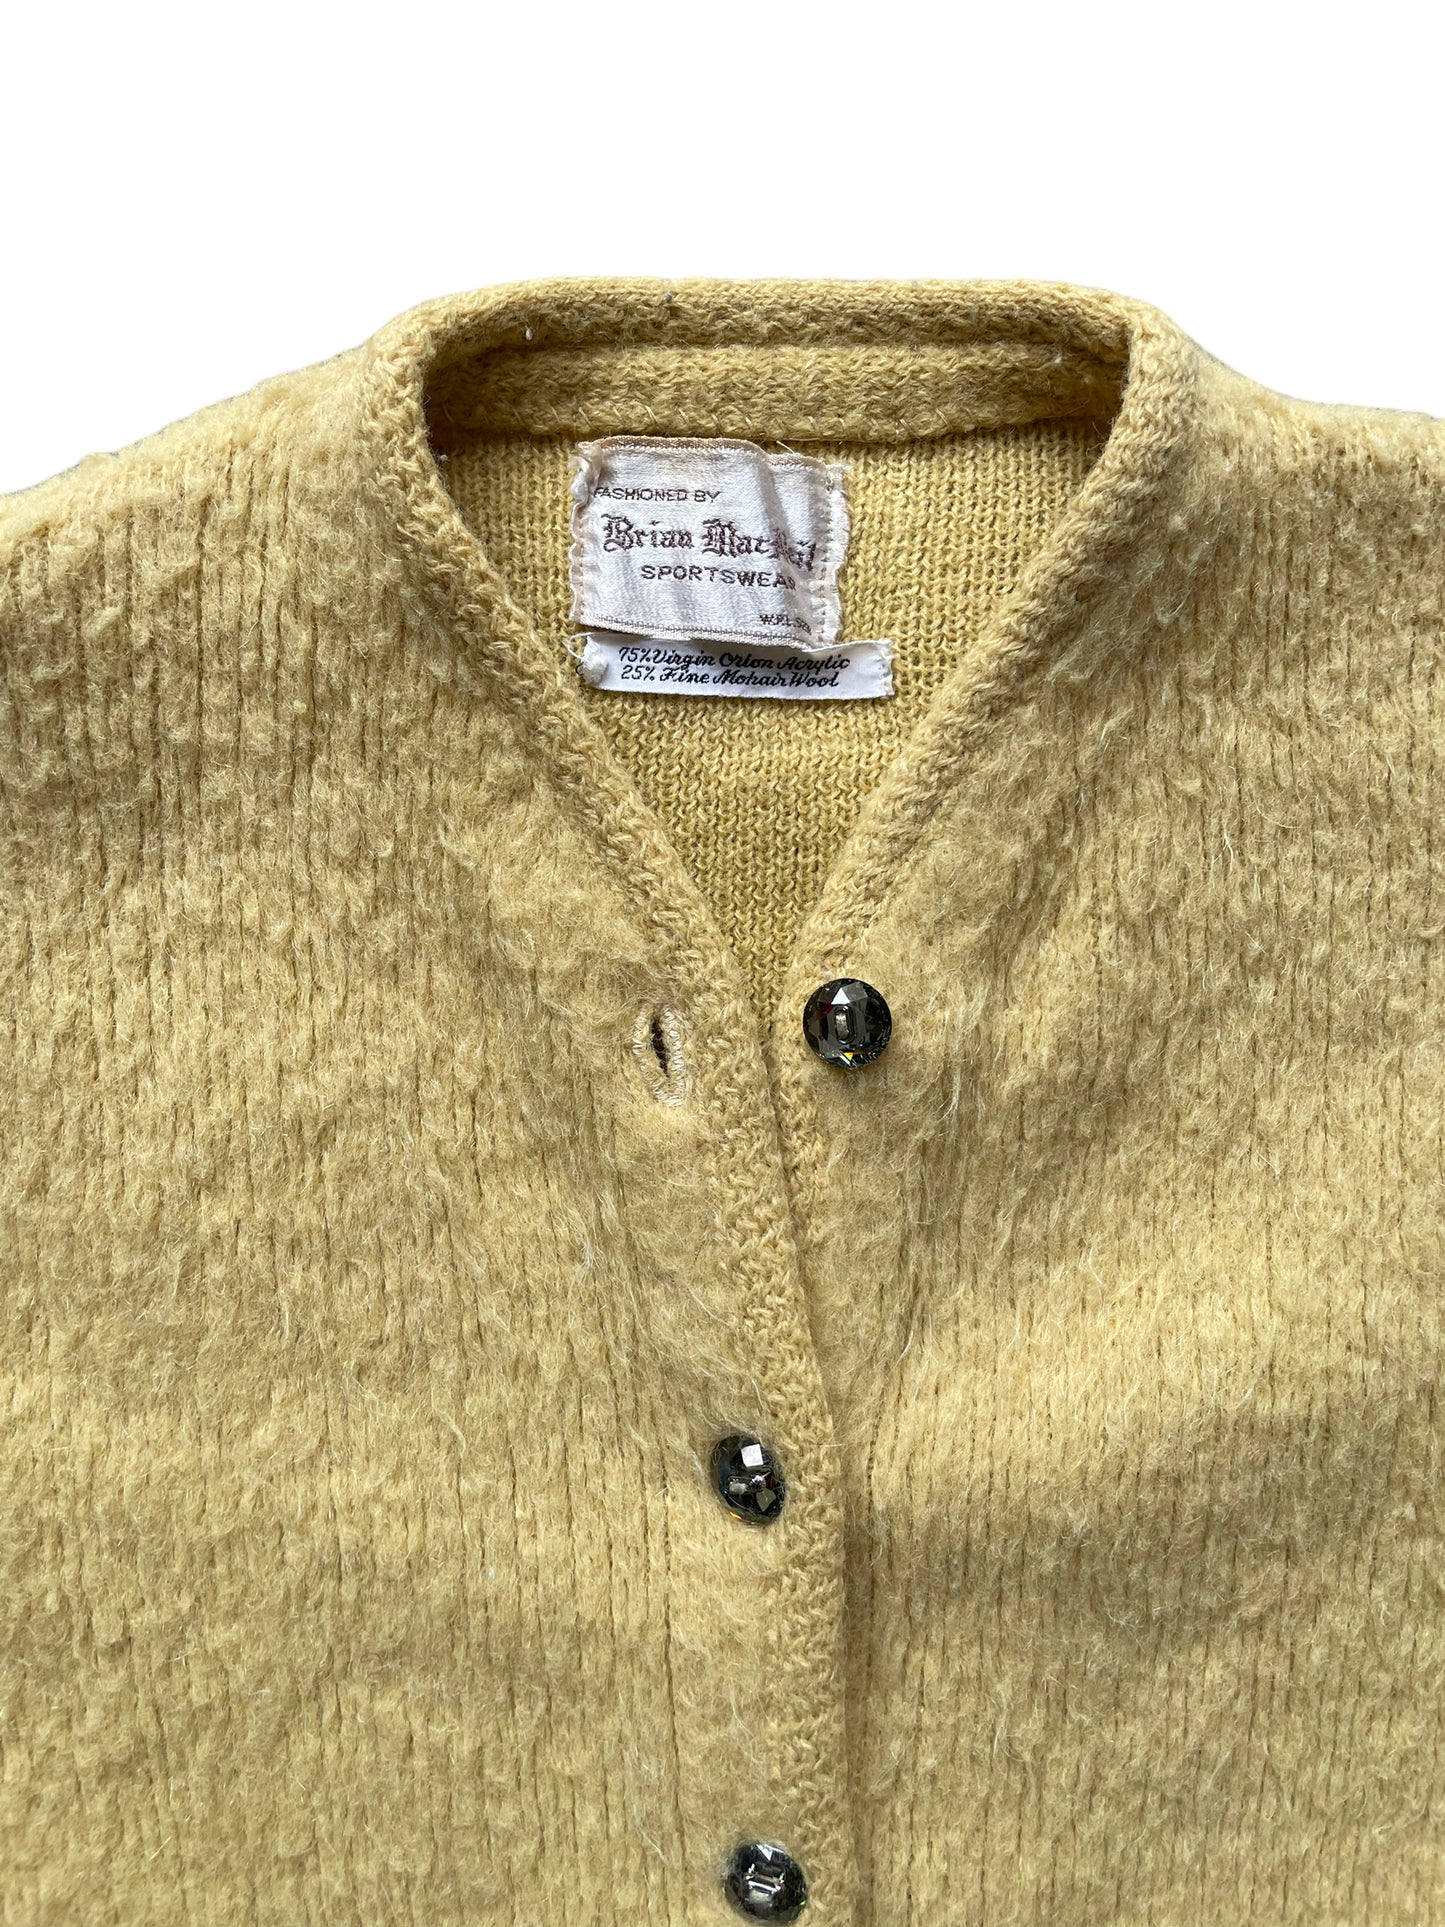 Collar view of Vintage 1950s Yellow Orlon Mohair Cardigan | Barn Owl Sweaters | Seattle Vintage